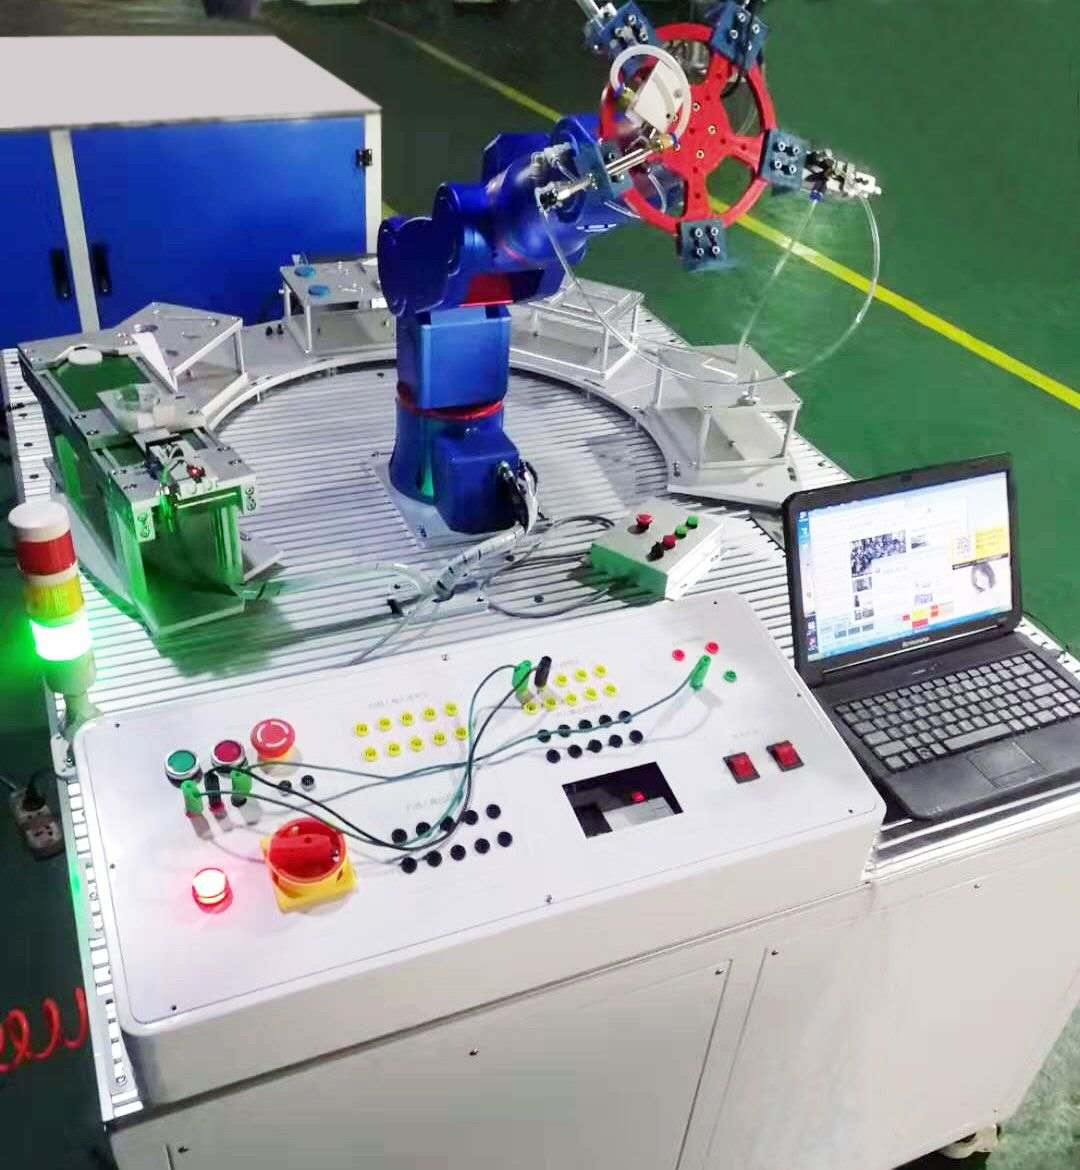 China education 6 axis robot can be used for commercial purpose(图6)